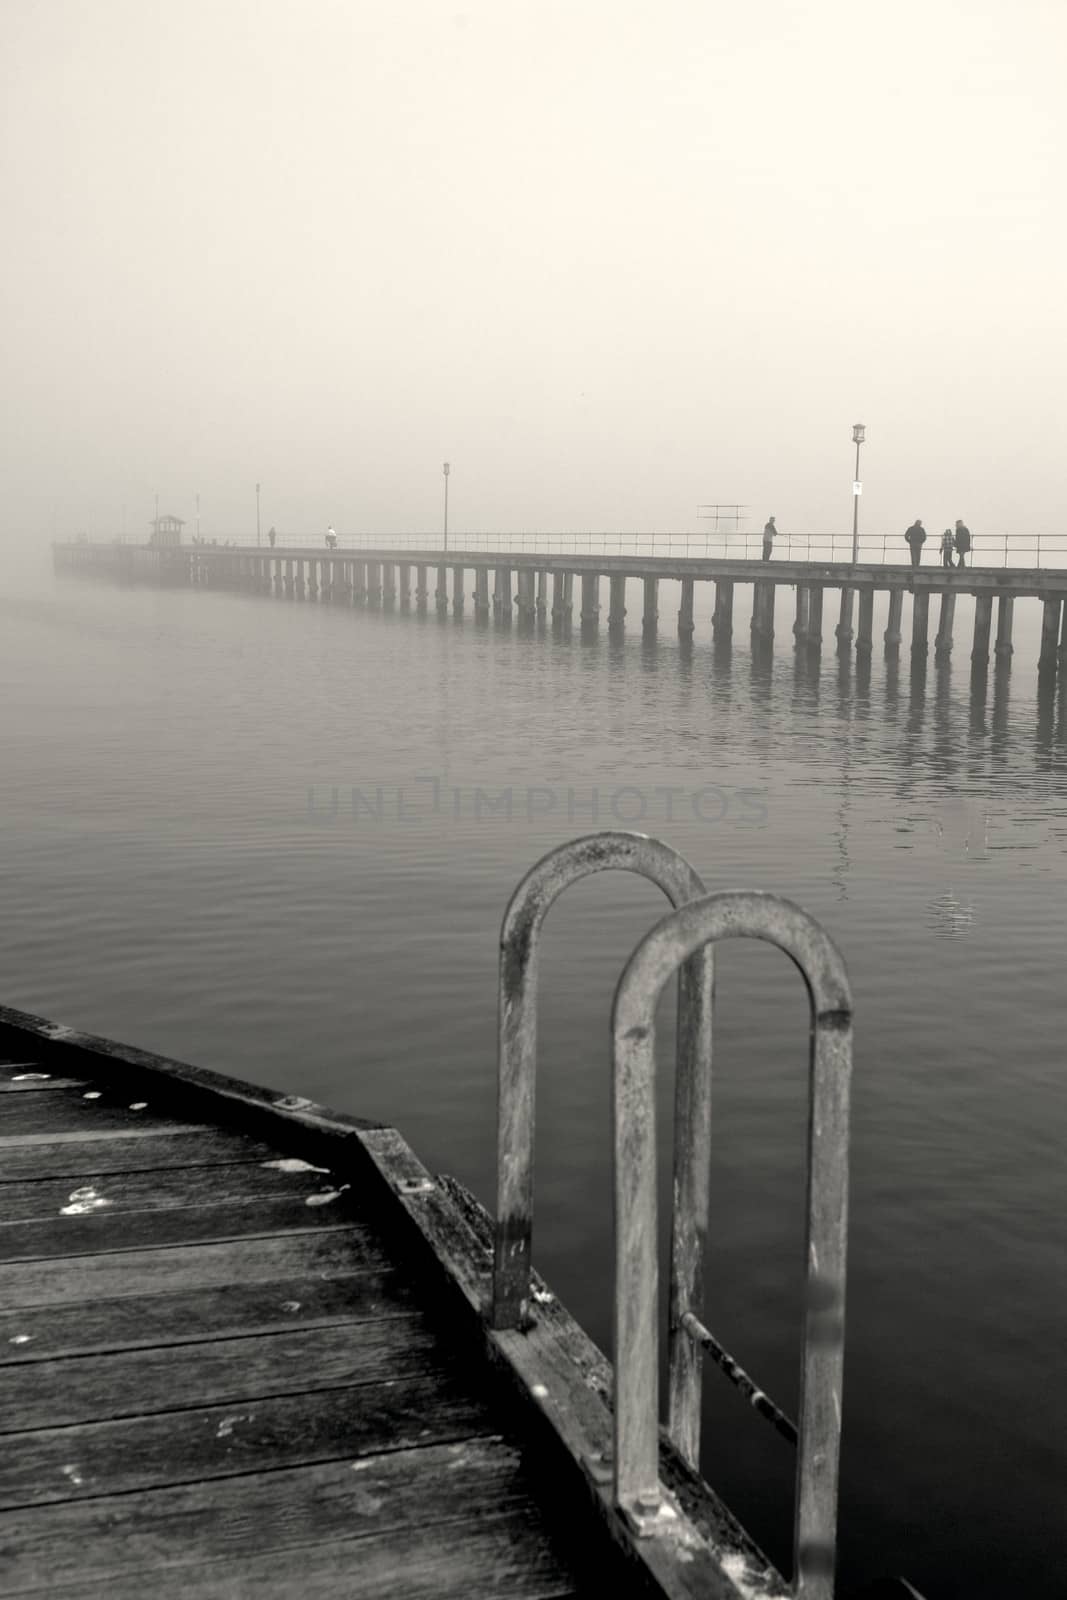 Mist over still water - Black and White